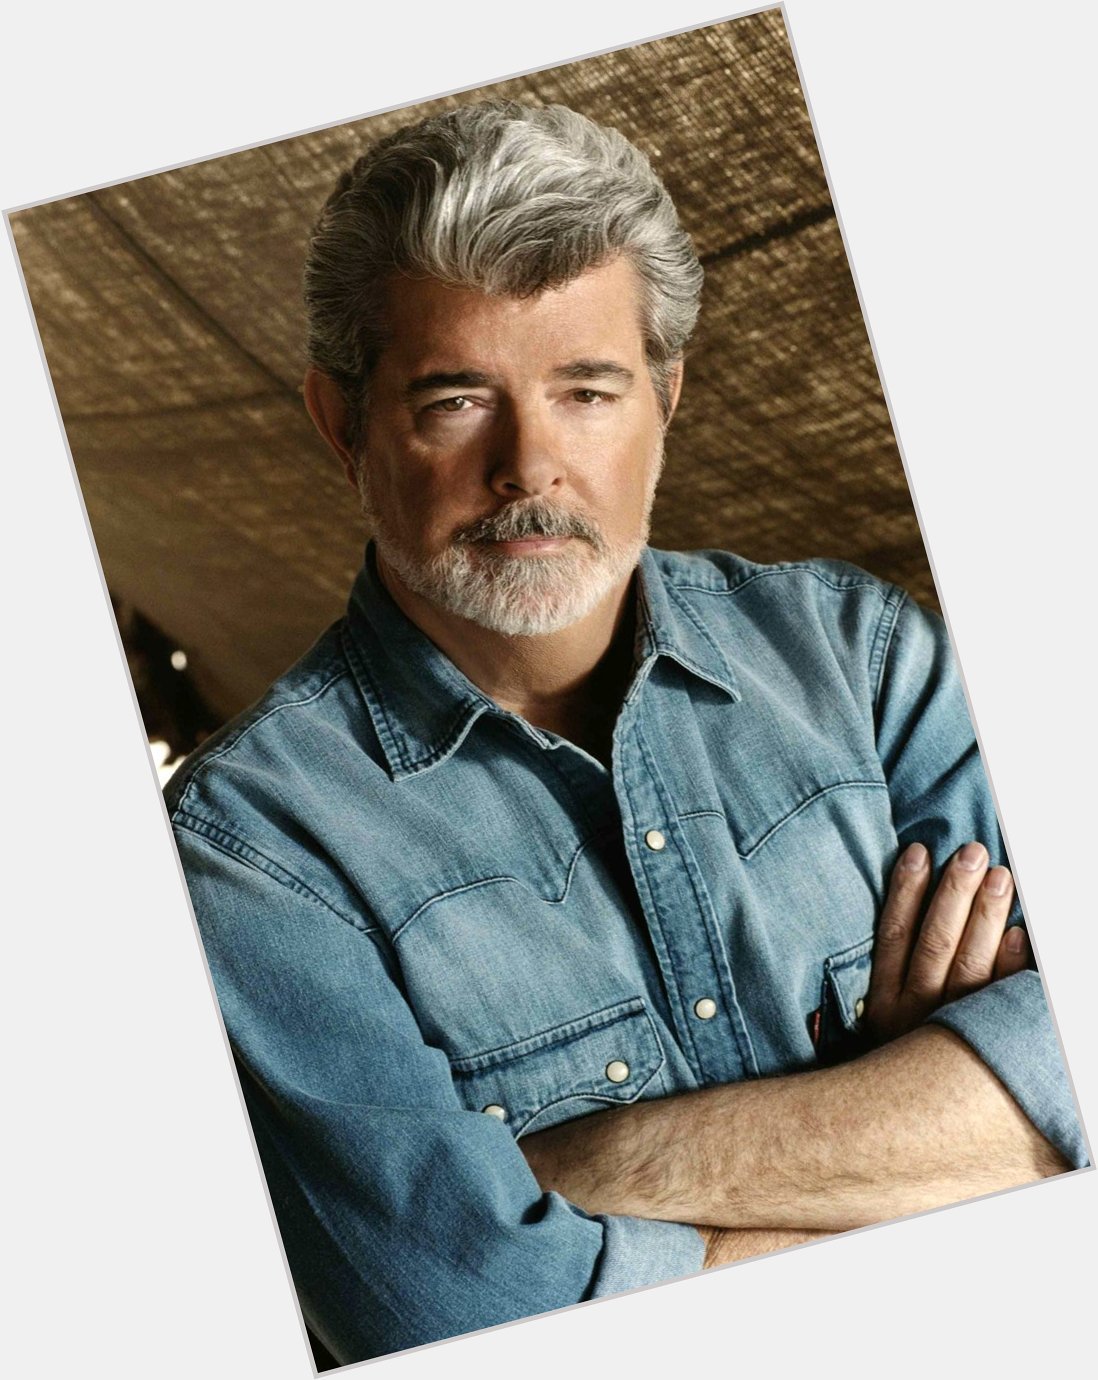 Happy Birthday to the man, the myth, the legend, George Lucas! 